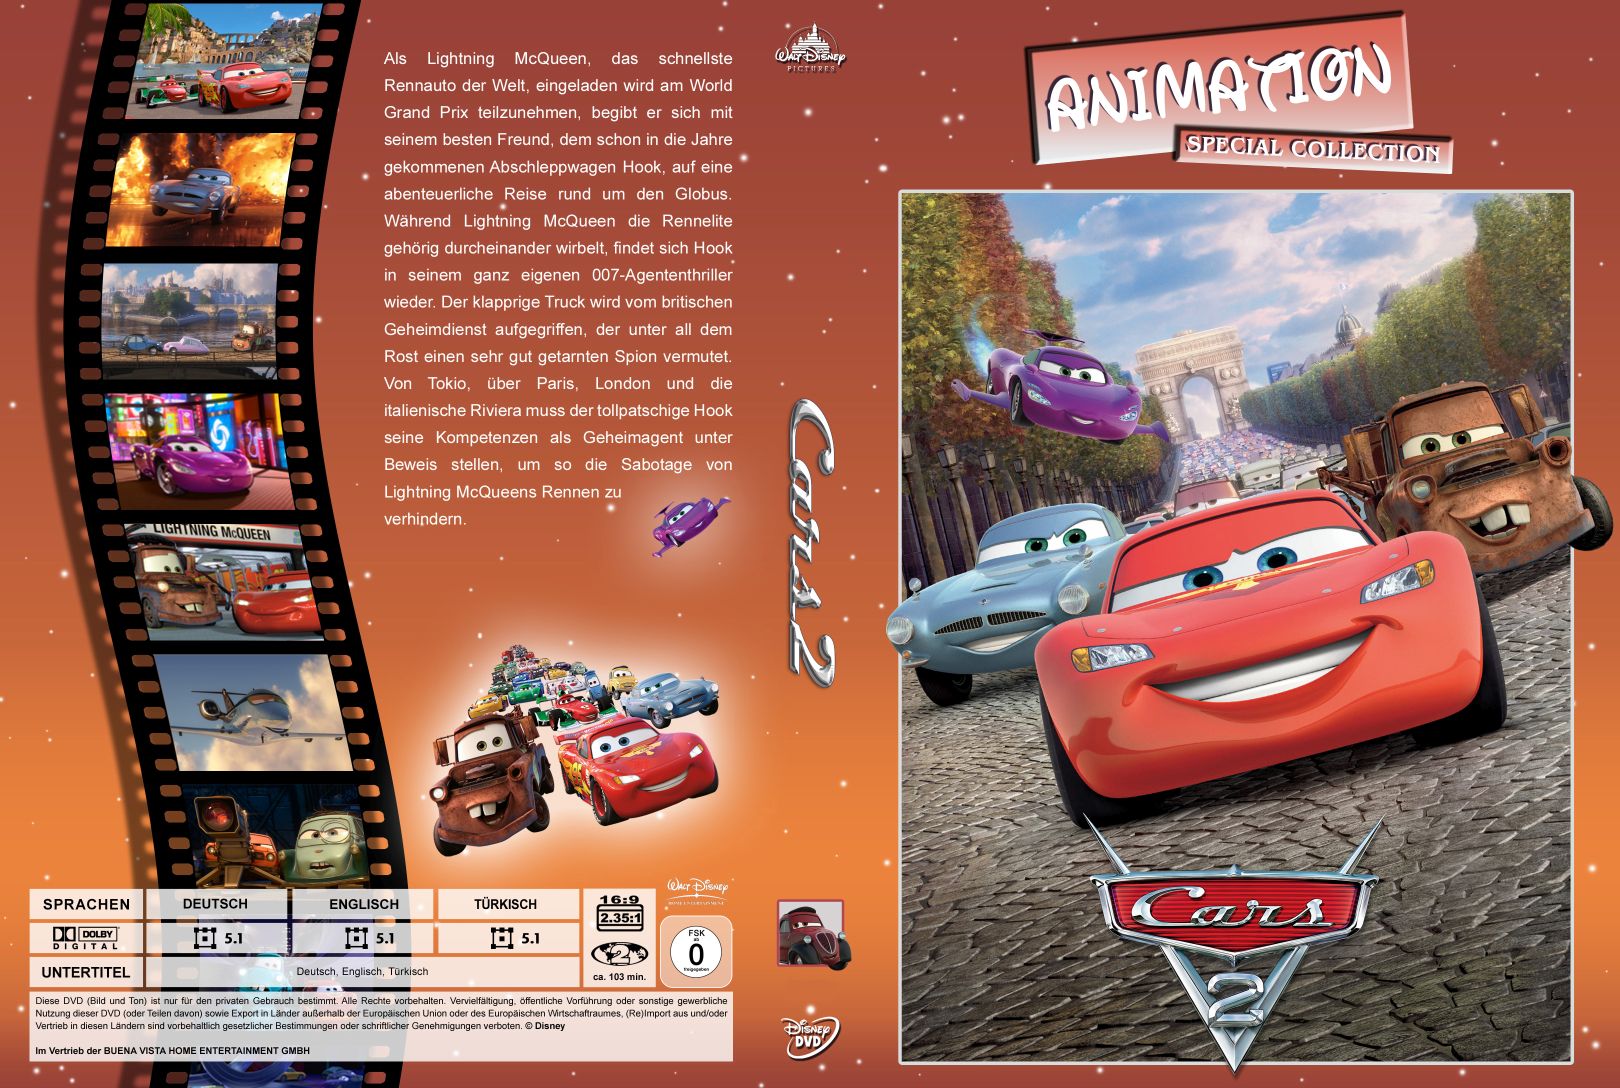 Cars 2 Dvd Covers Cover Century Over 500 000 Album Art Covers For Free